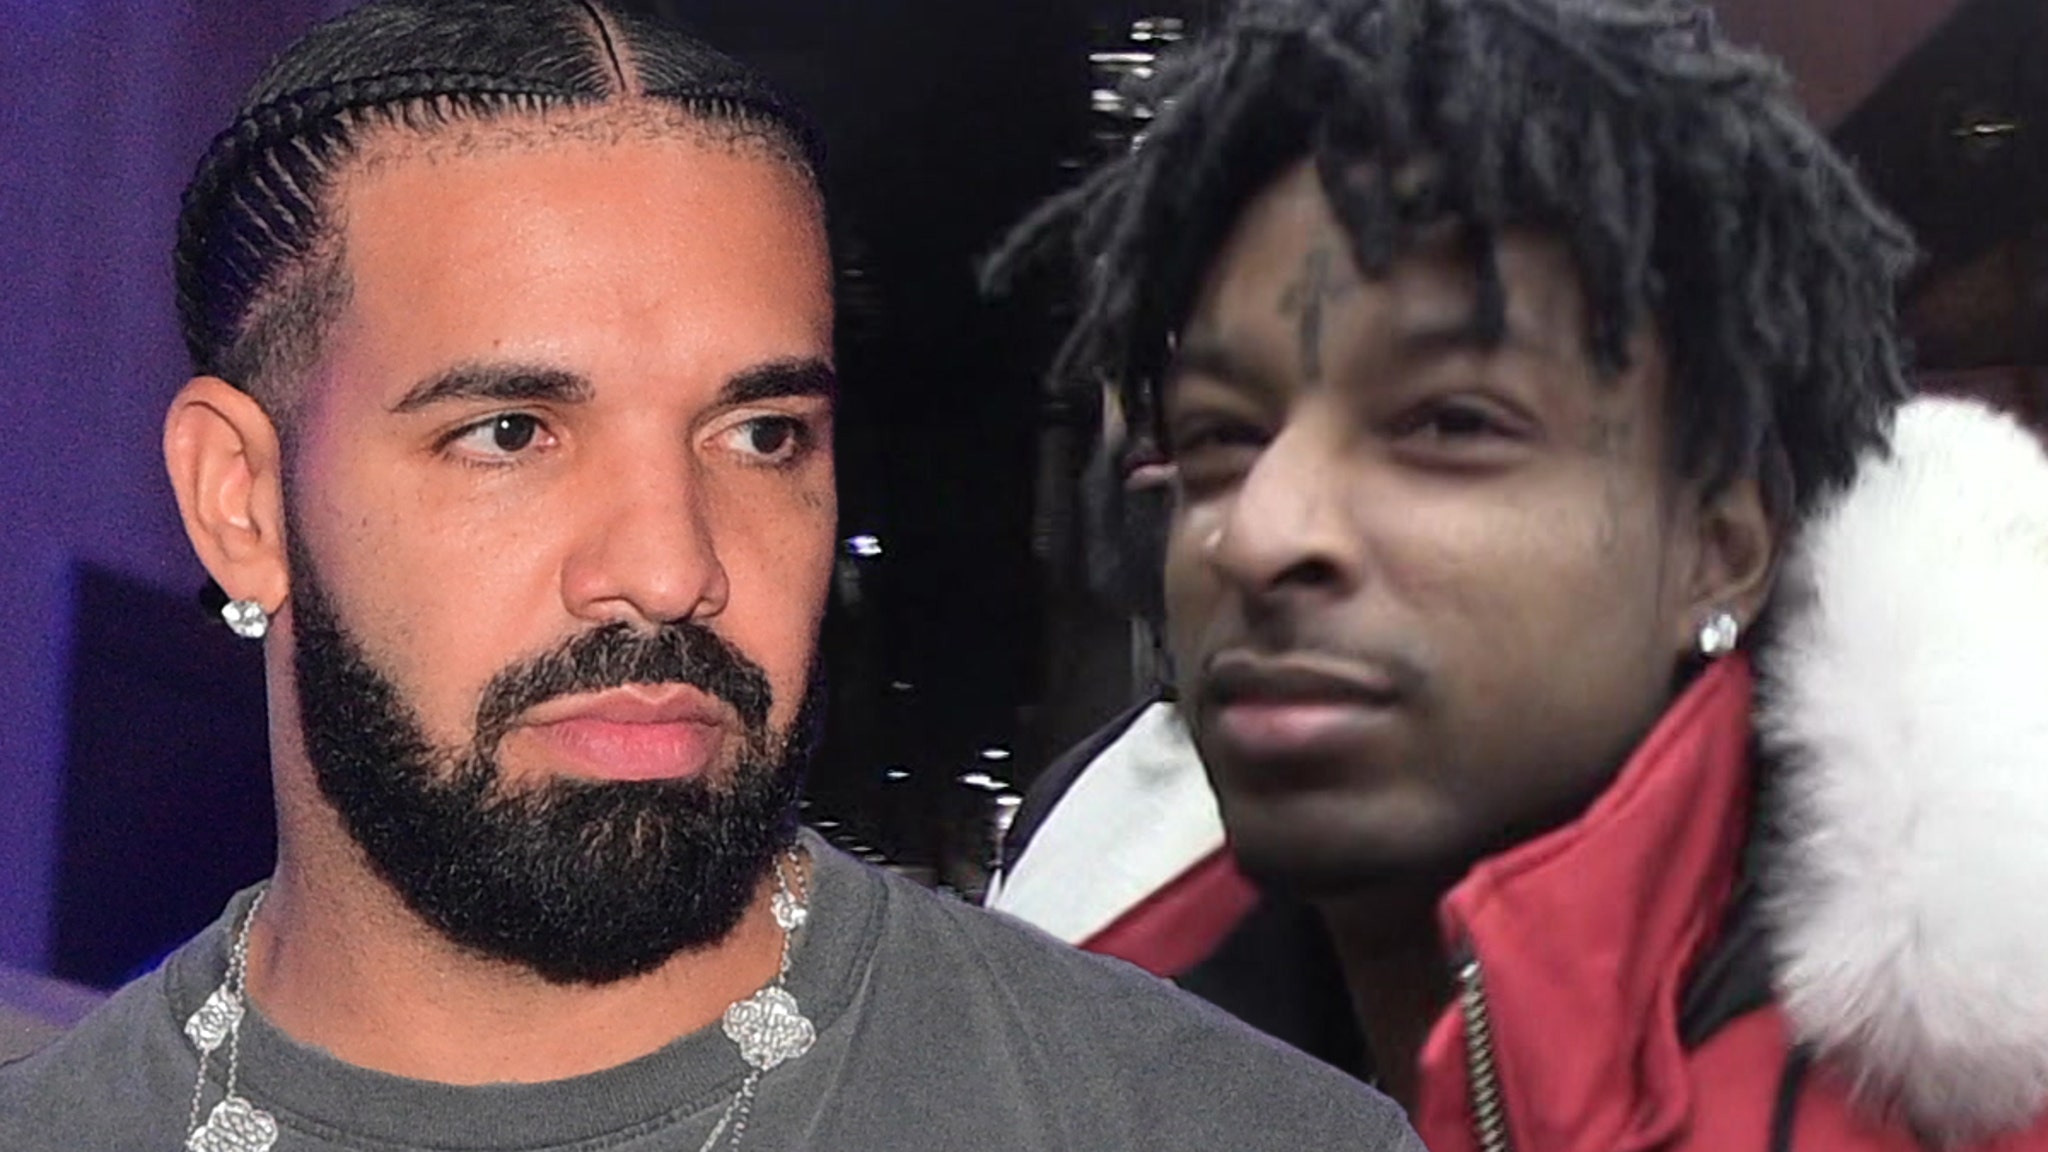 Drake and 21 Savage Collab Album Delayed, Producer Got COVID